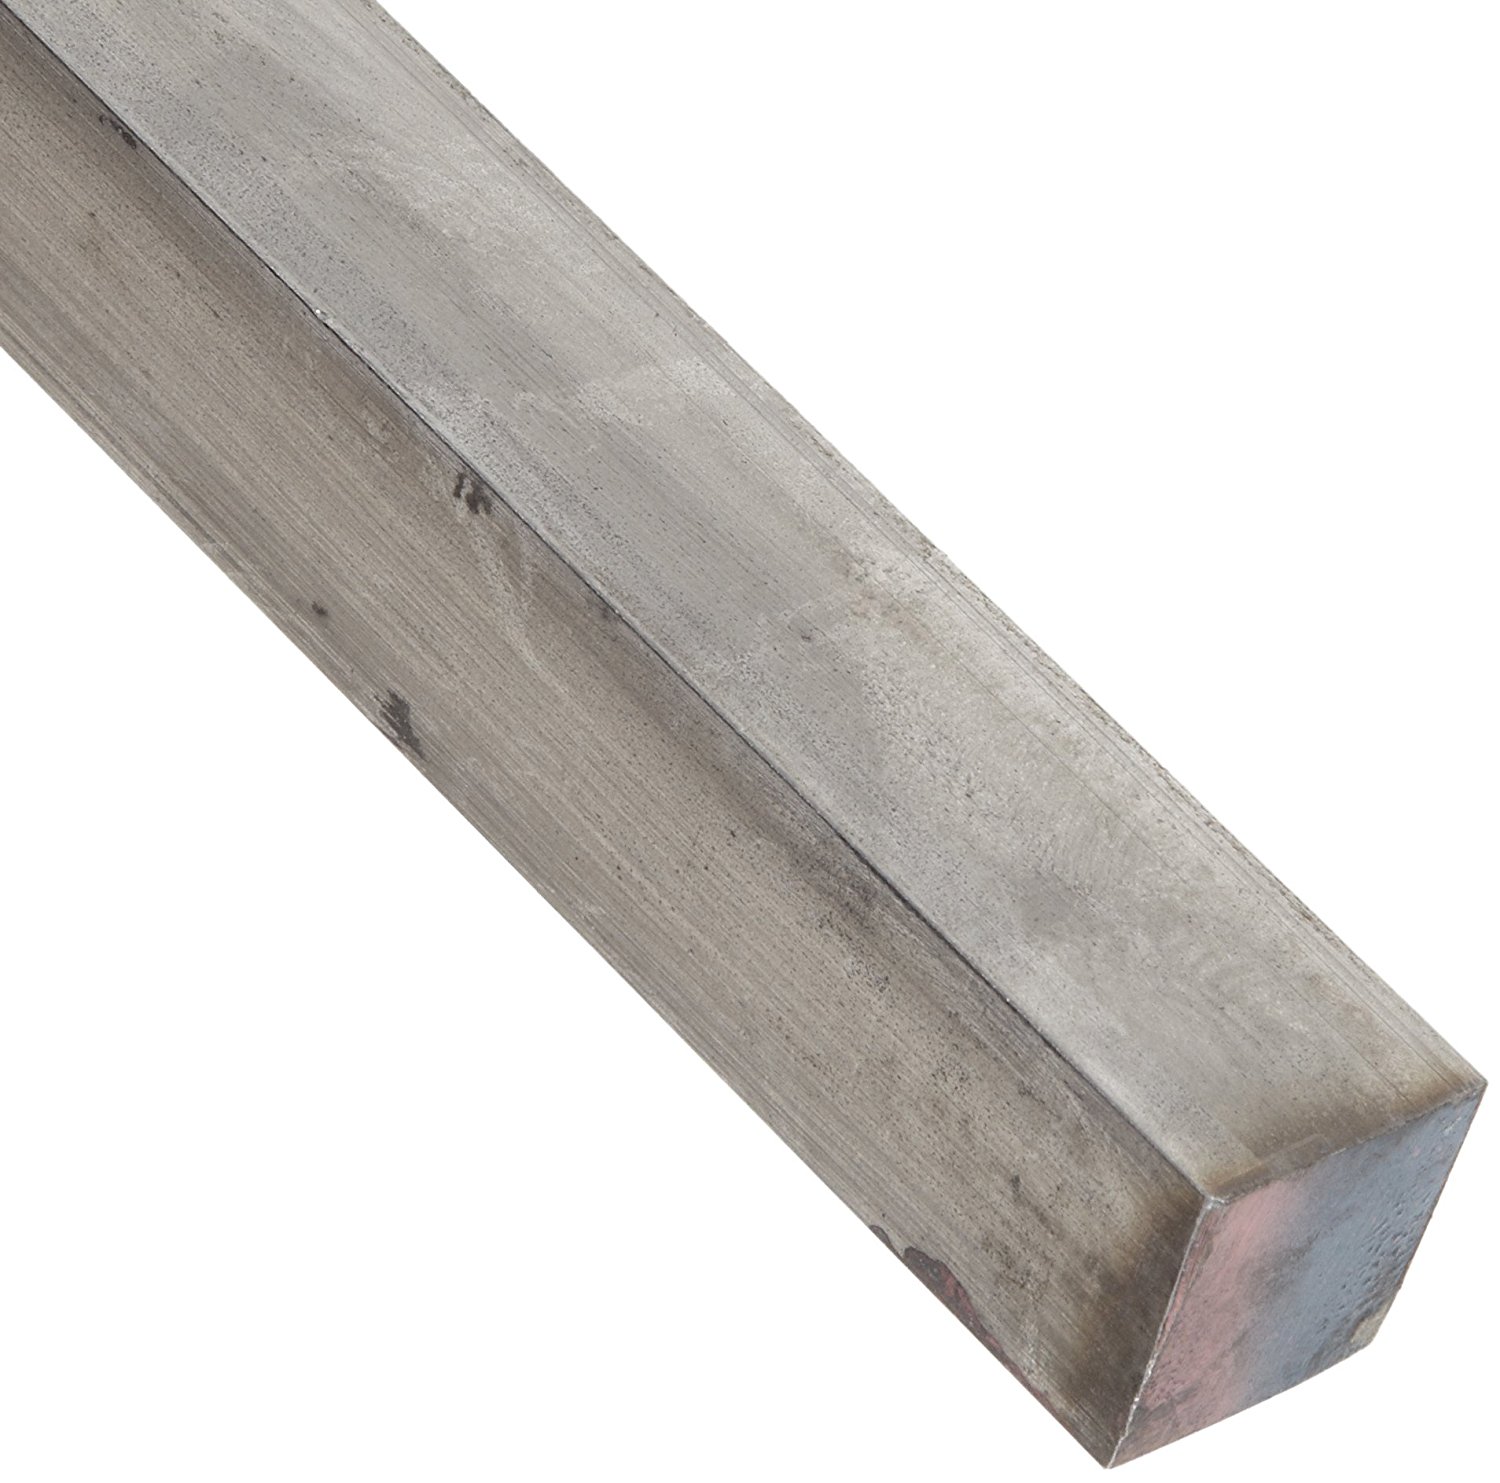 Stainless Steel 440B Square Bars & Rods Manufacturer & Exporter 